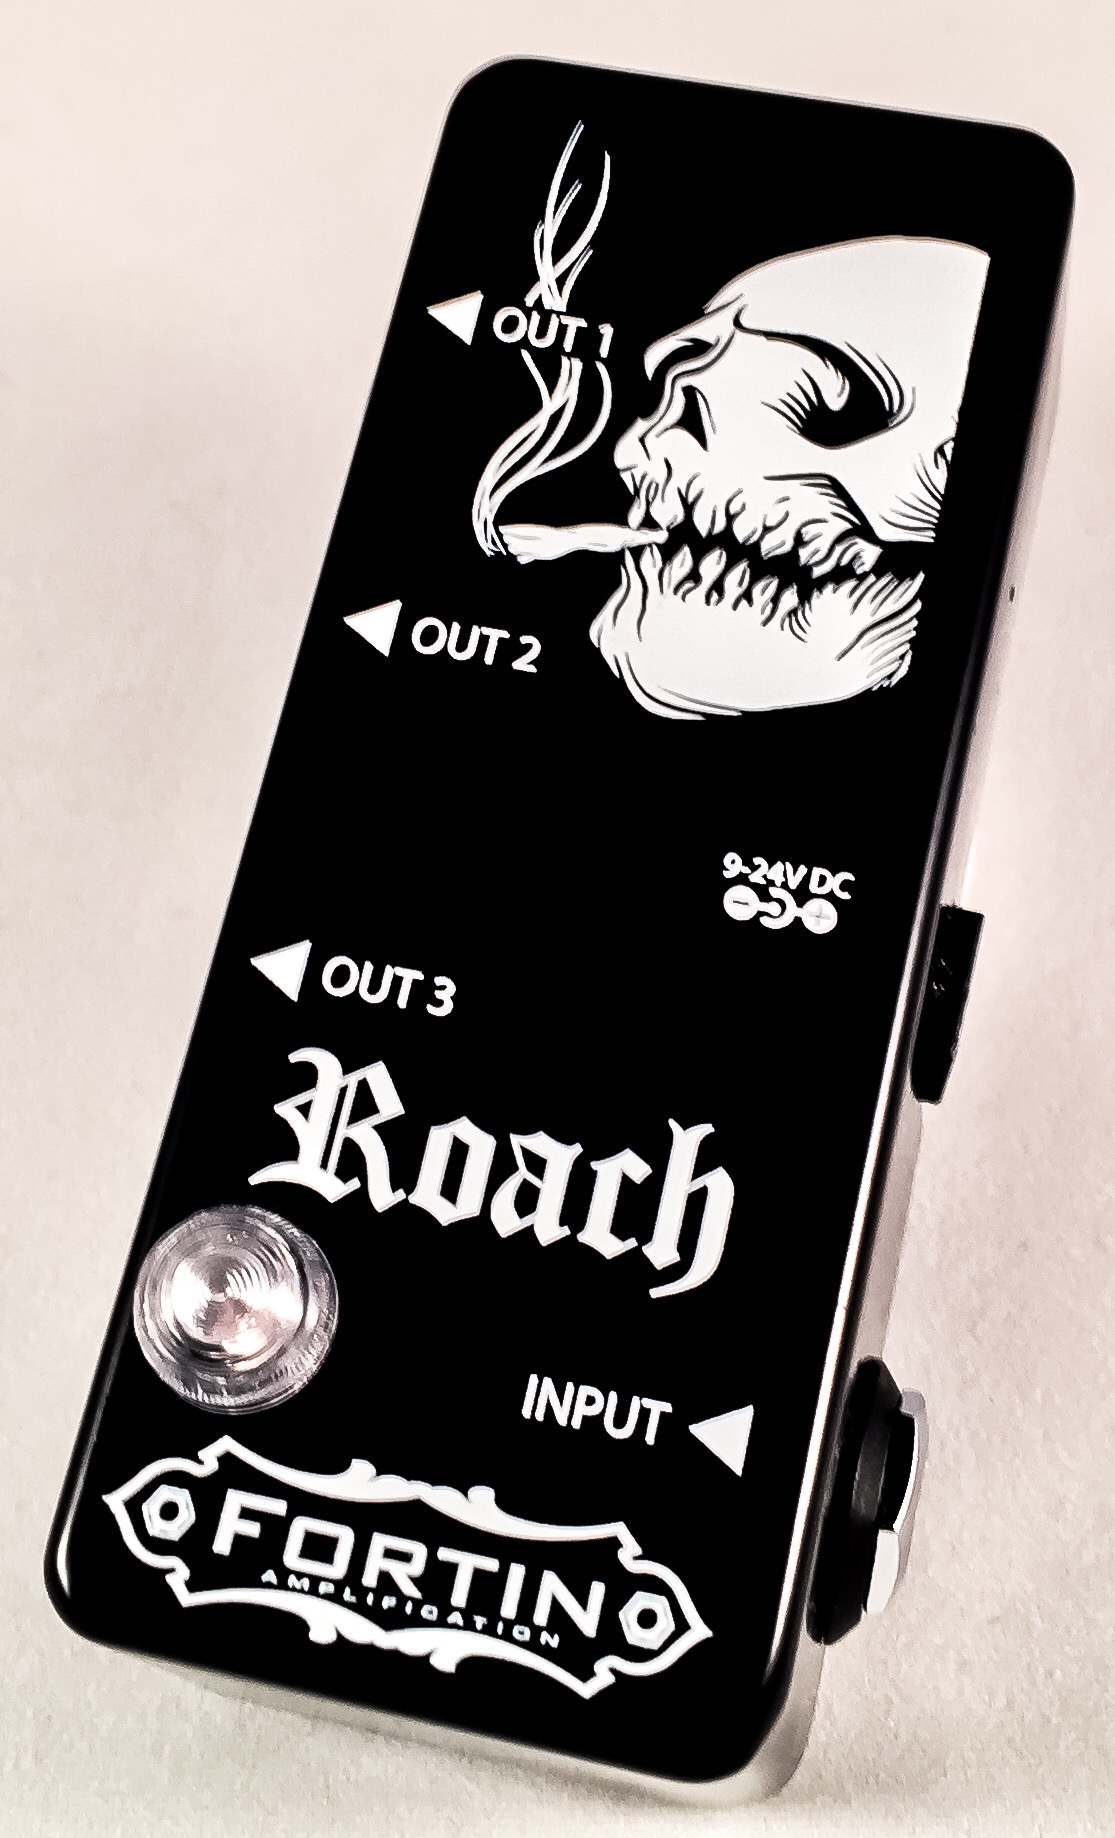 Fortin Amps Roach 3-way Splitter - Switch pedal - Variation 1